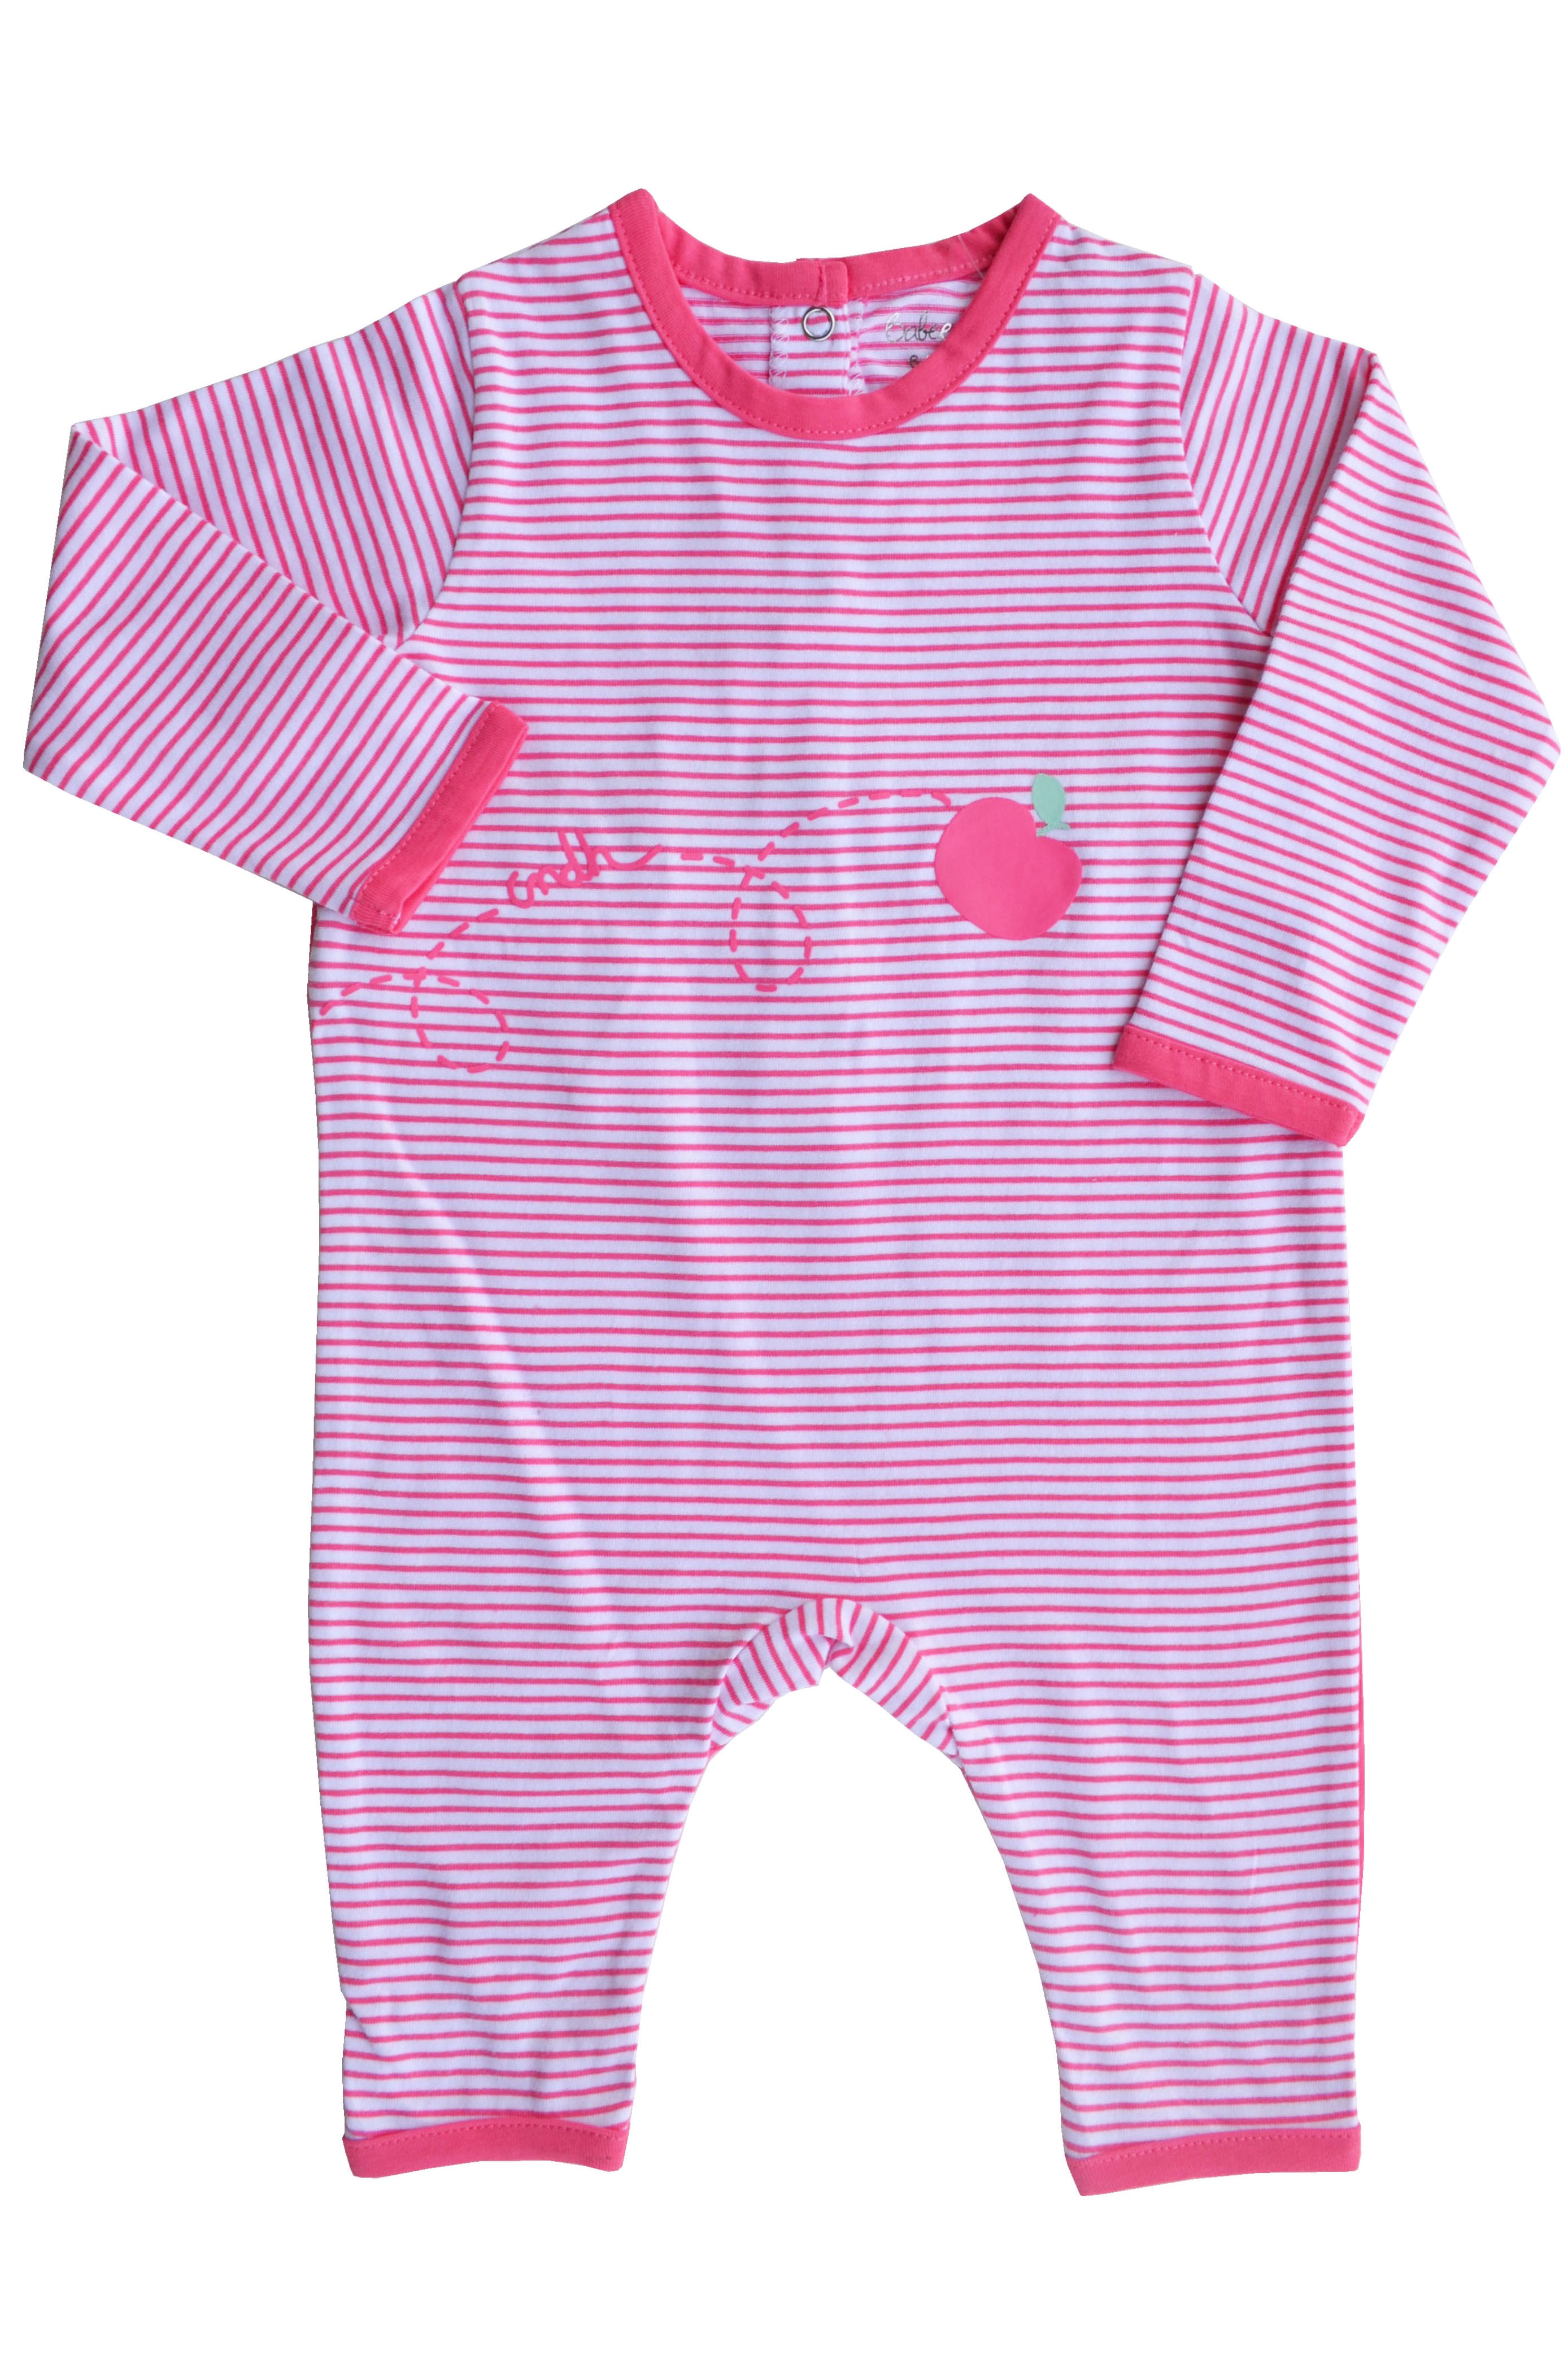 Babeez | Pink Stripes Sleeper Without Feet (100% Cotton Single Jersey) undefined